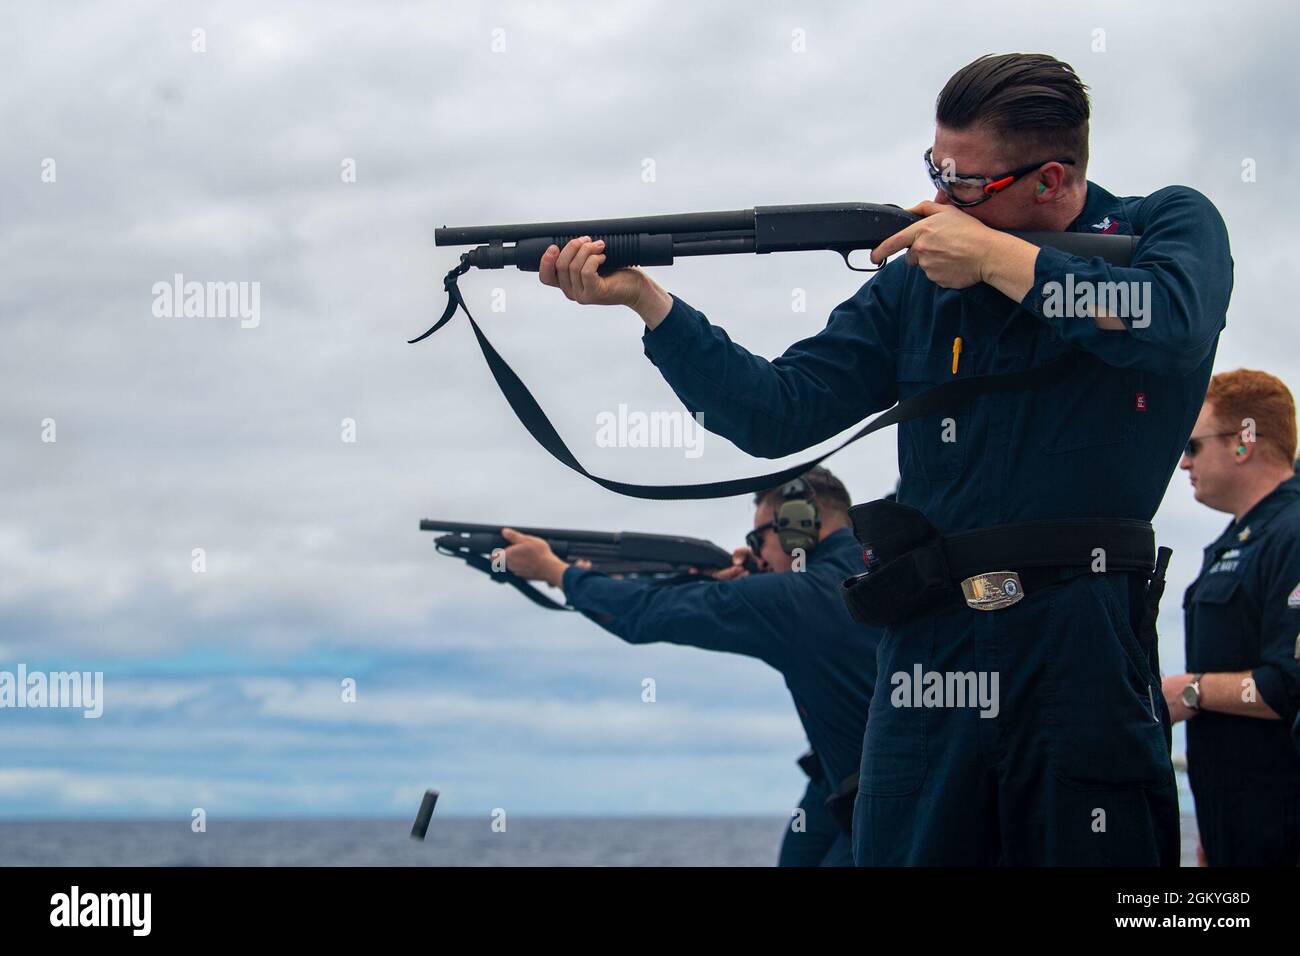 210728-N-LP924-1279 PACIFIC OCEAN (July 28, 2021) Cryptologic Technician Technical First Class Robert Grimm, a native of Bishop, California, fires an M500 shotgun off the flight deck of Arleigh Burke Class Destroyer USS Michael Murphy (DDG 112), July 28, 2021. Murphy is returning to its home port of Pearl Harbor after supporting U.S. Third Fleet operations. Stock Photo